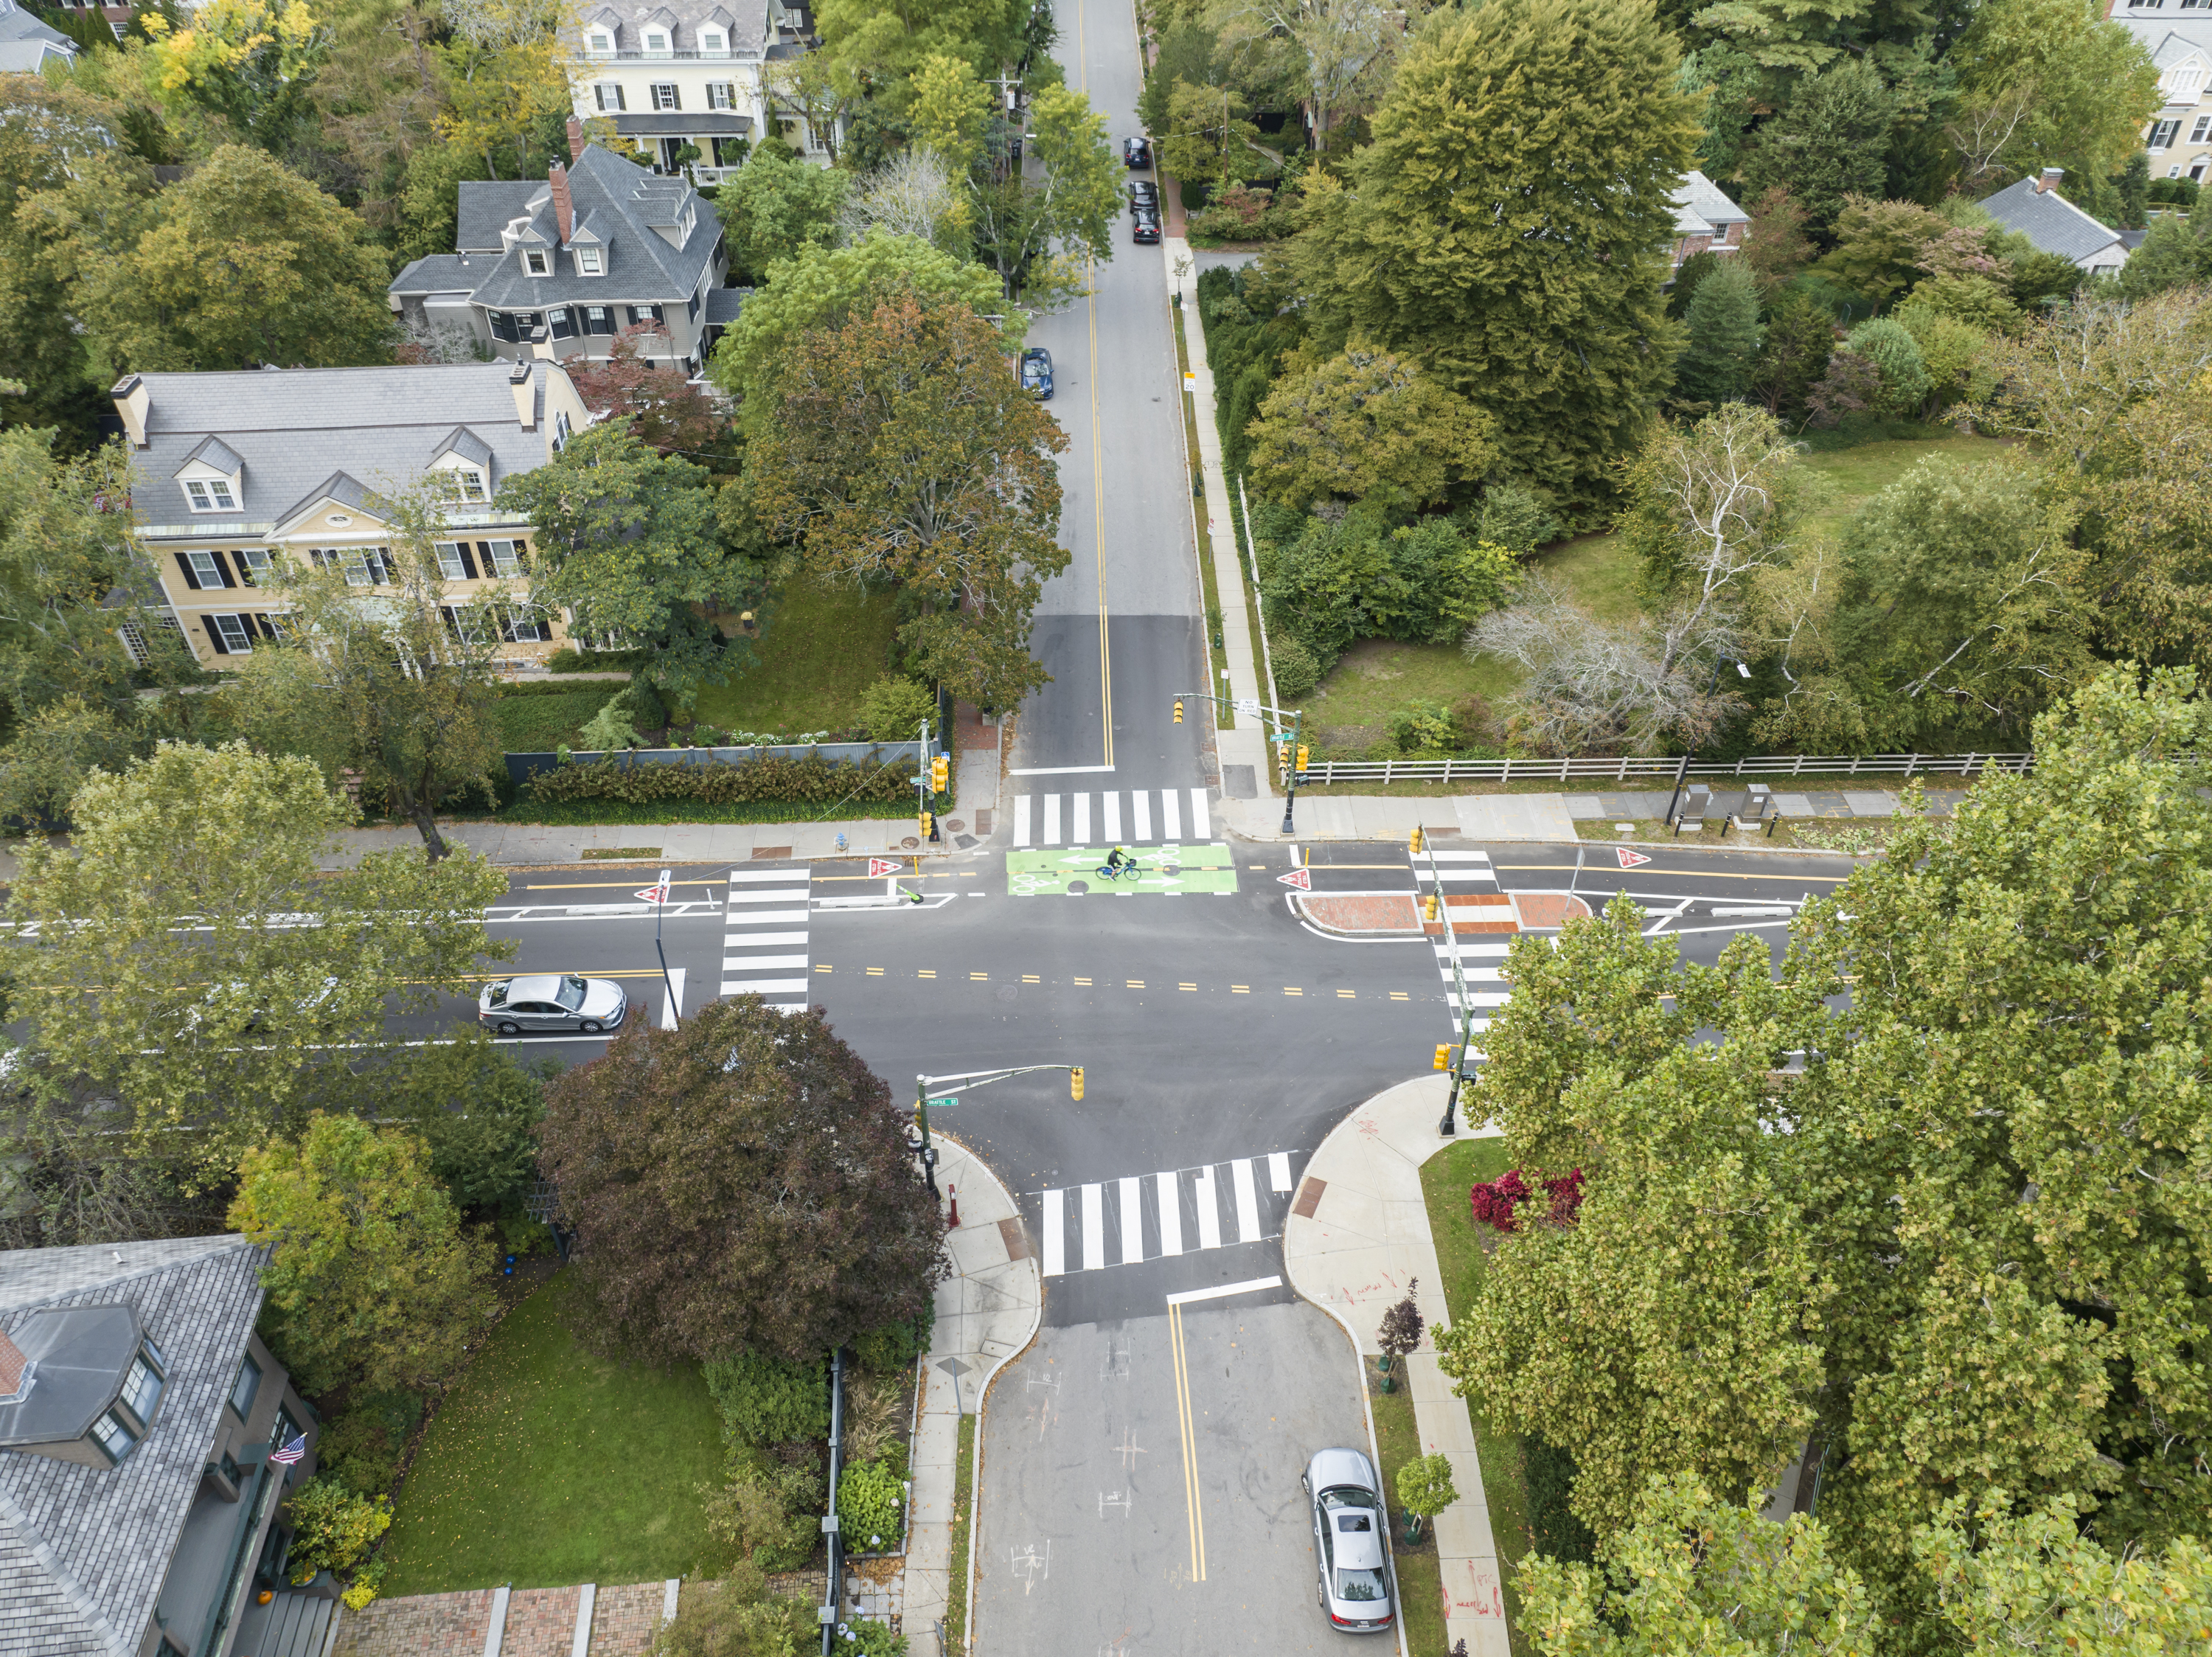 Aerial view of brattle street intersection and bike lanes. Person biking on separated bike lanes.